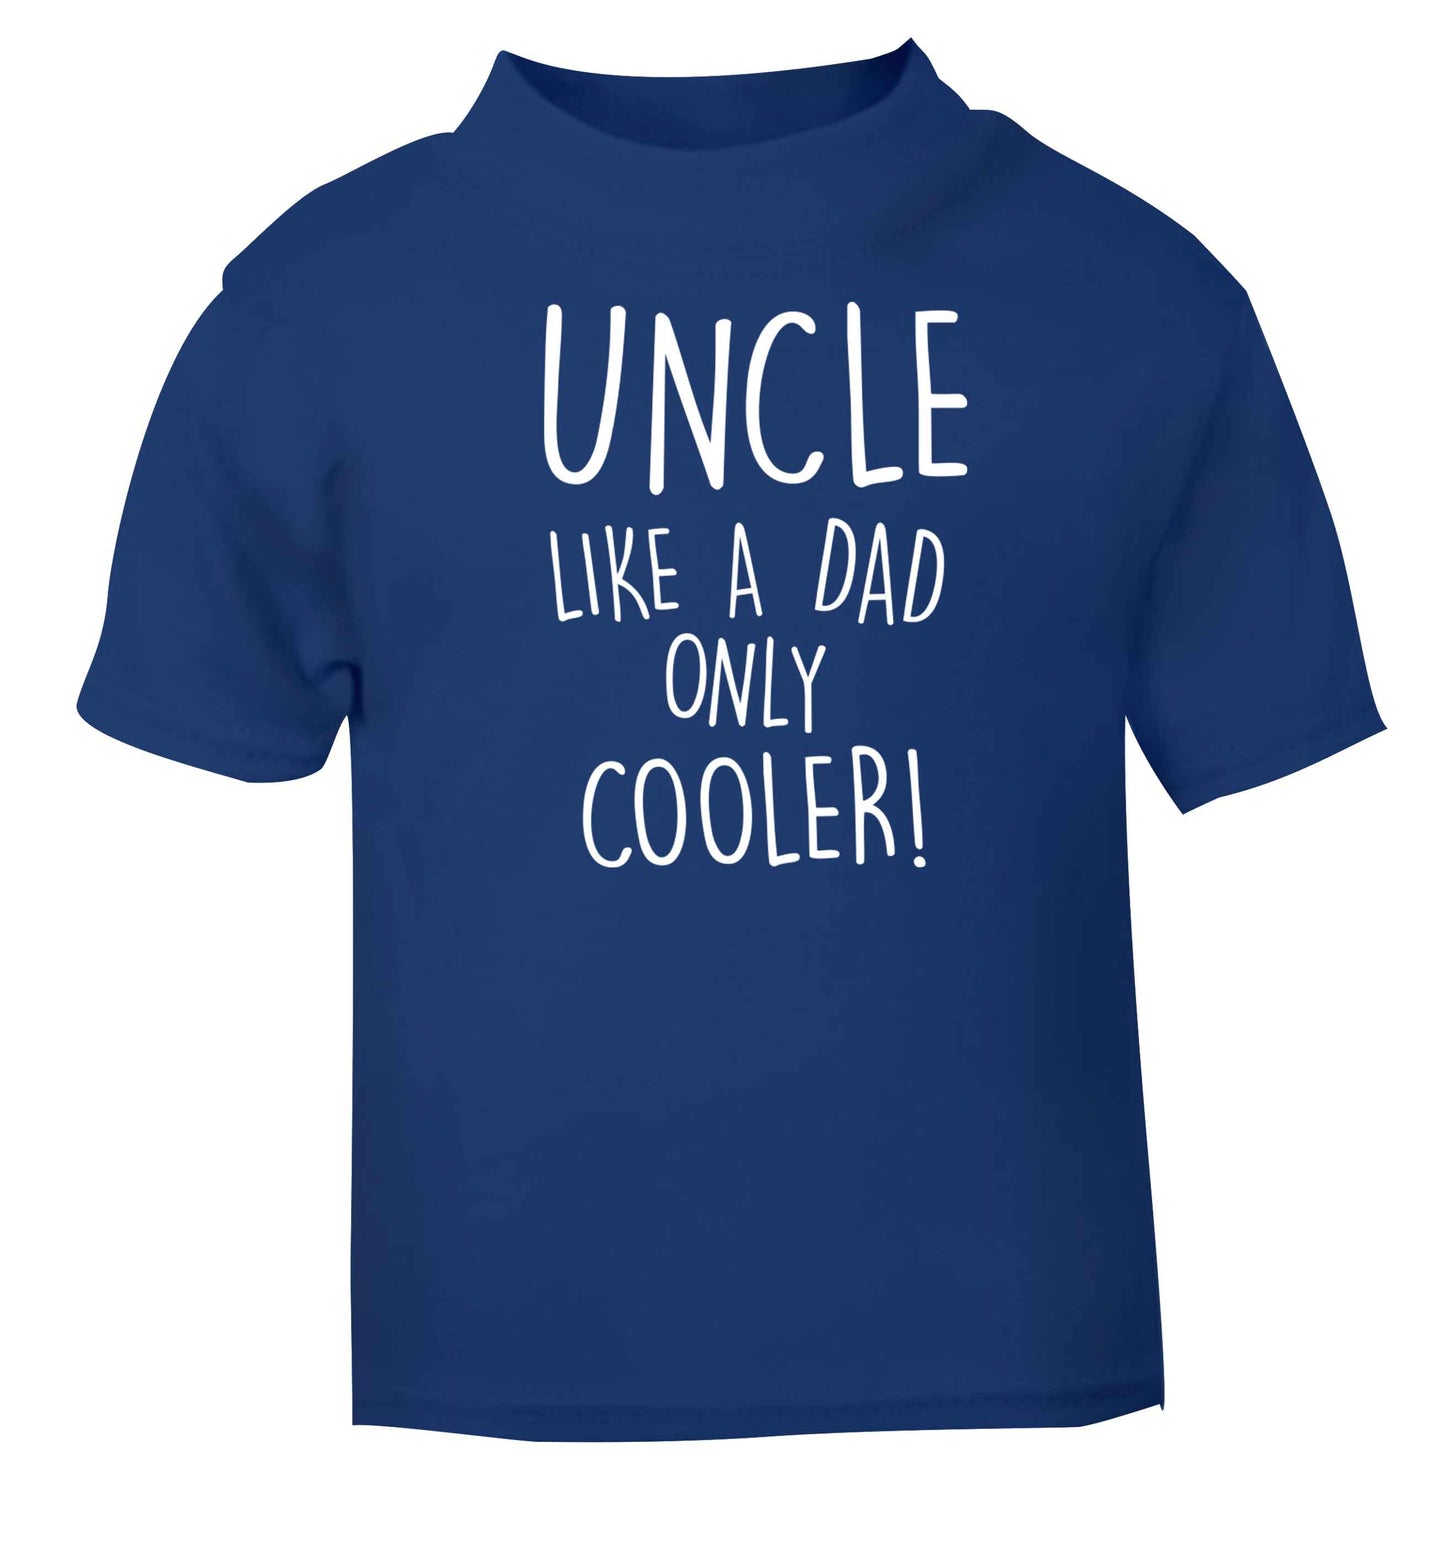 Uncle like a dad only cooler blue baby toddler Tshirt 2 Years